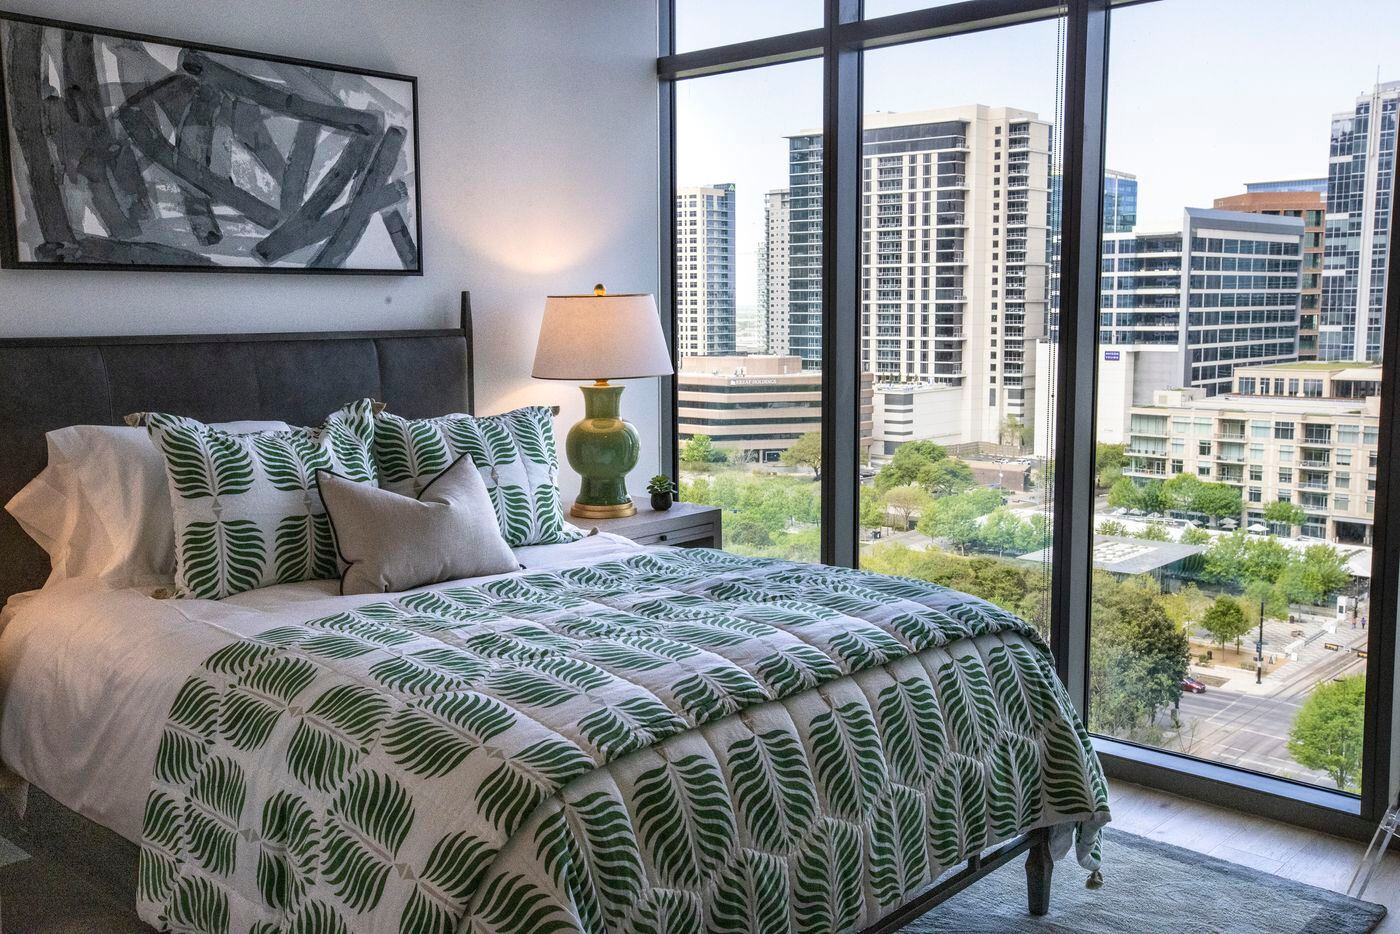 A bedroom at the Atelier, a 41-story luxury residential building in the heart of the Dallas...